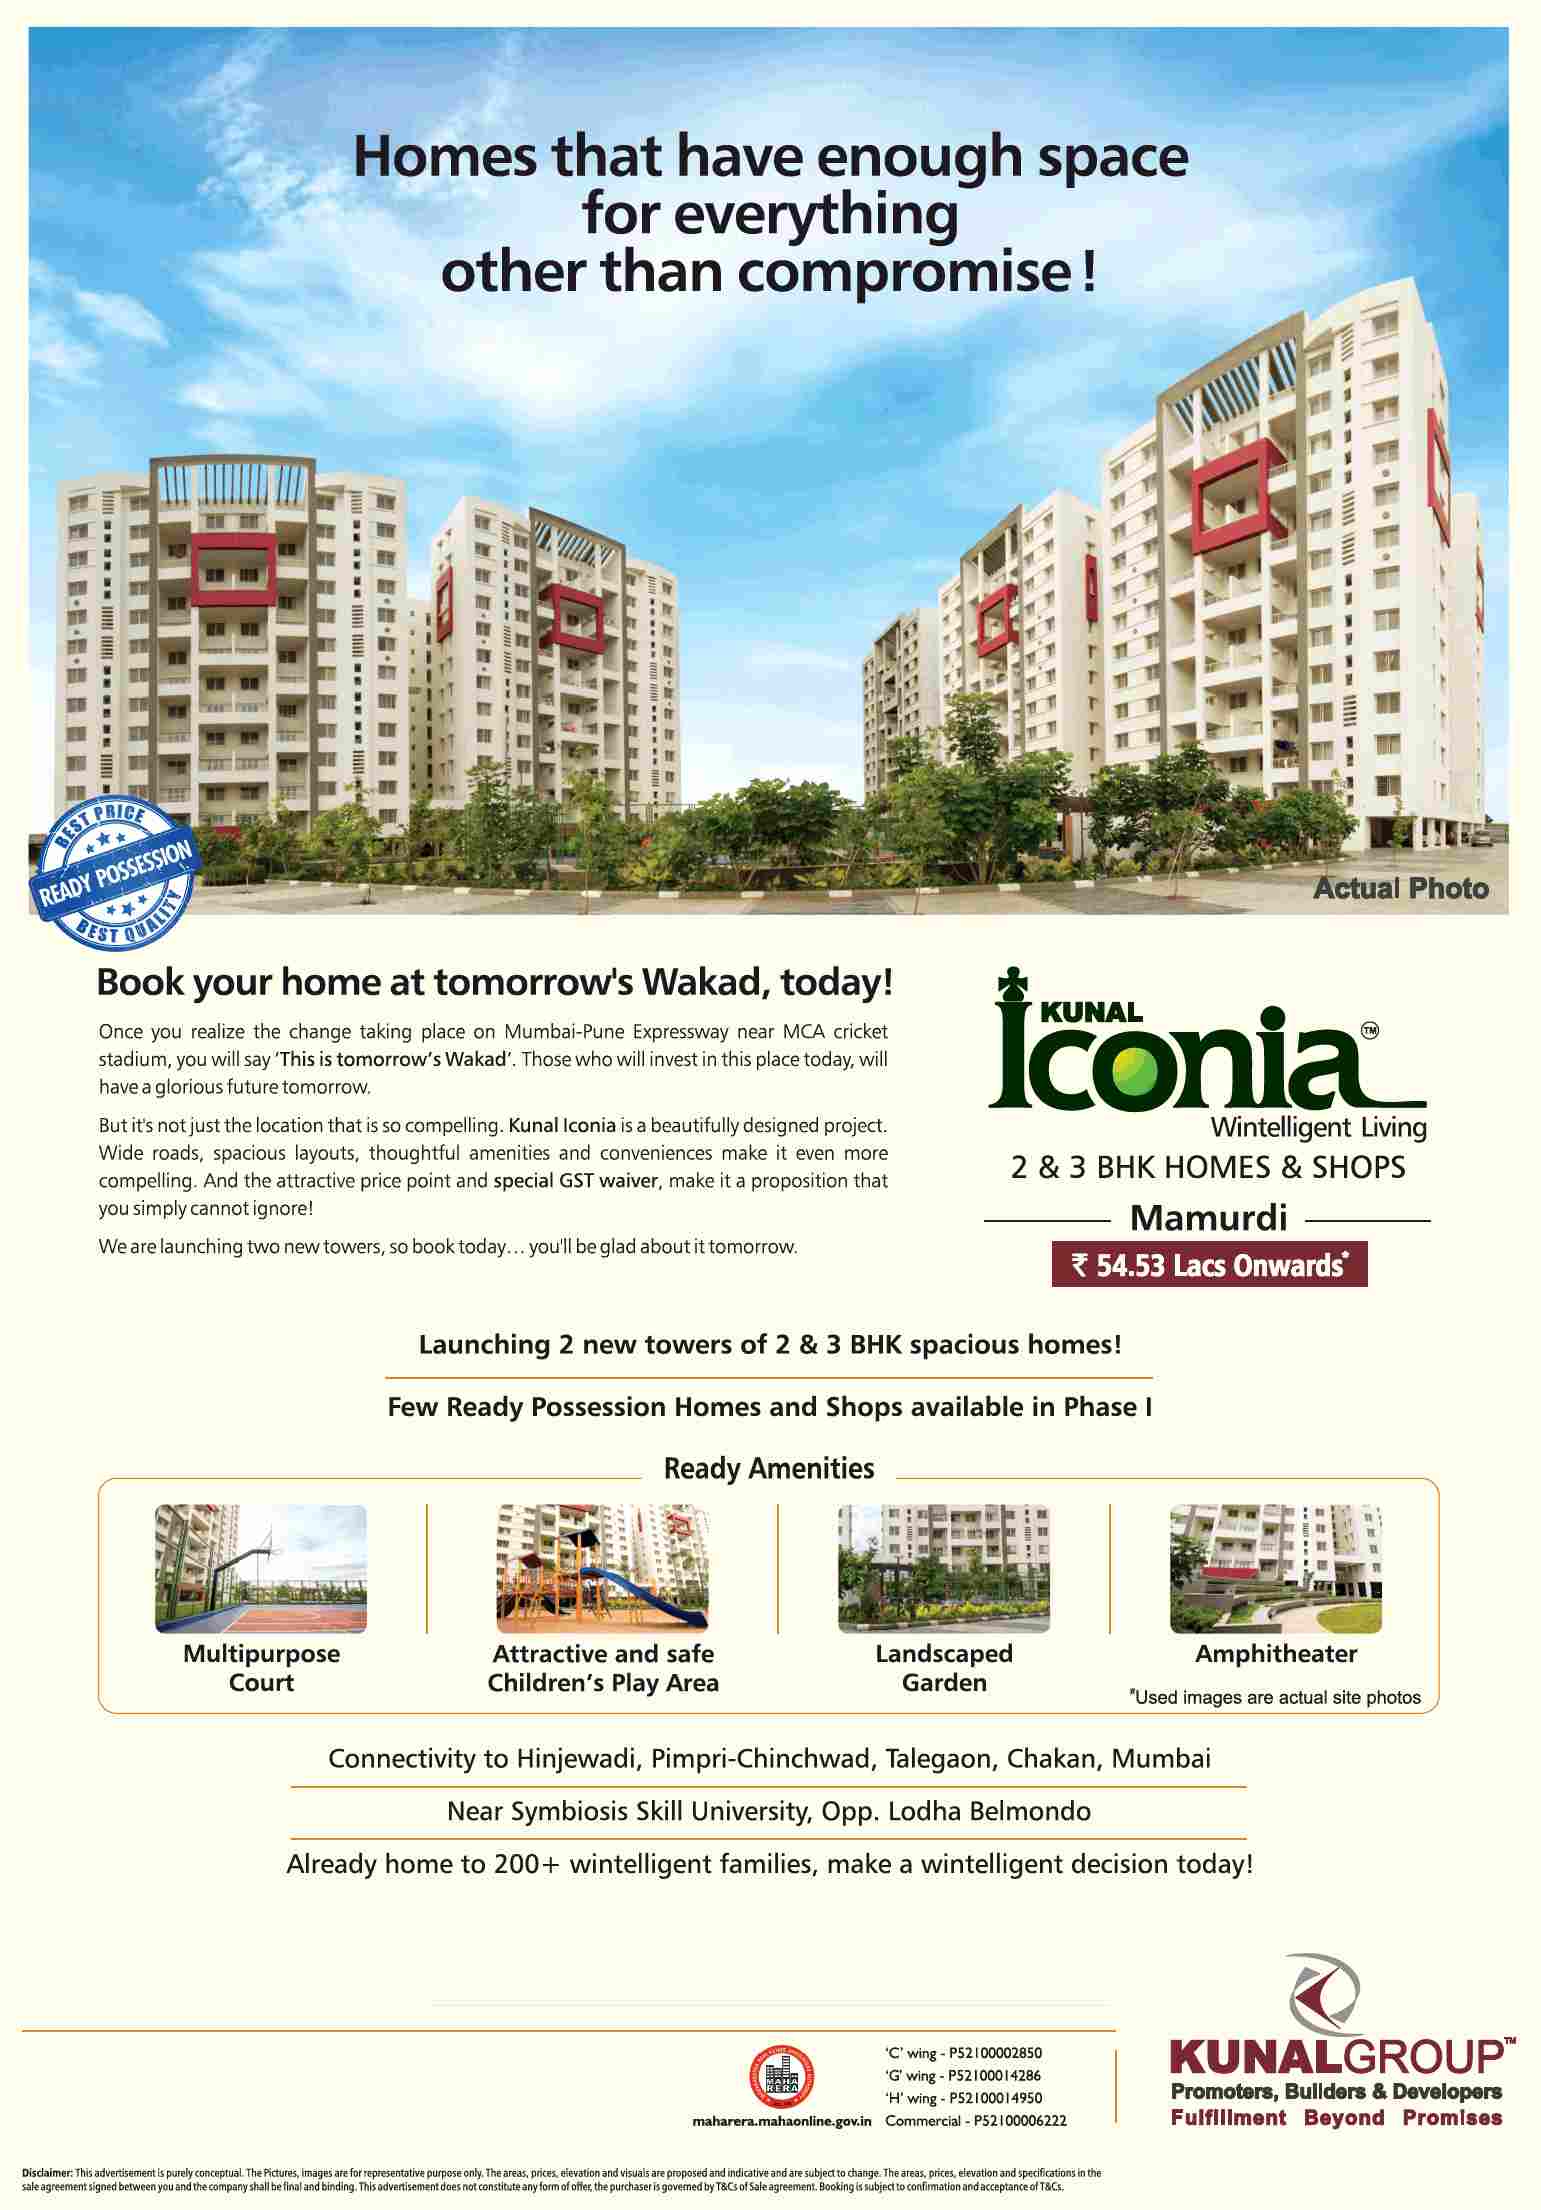 Launching 2 new towers of 2 & 3 BHK homes at Kunal Iconia in Pune Update